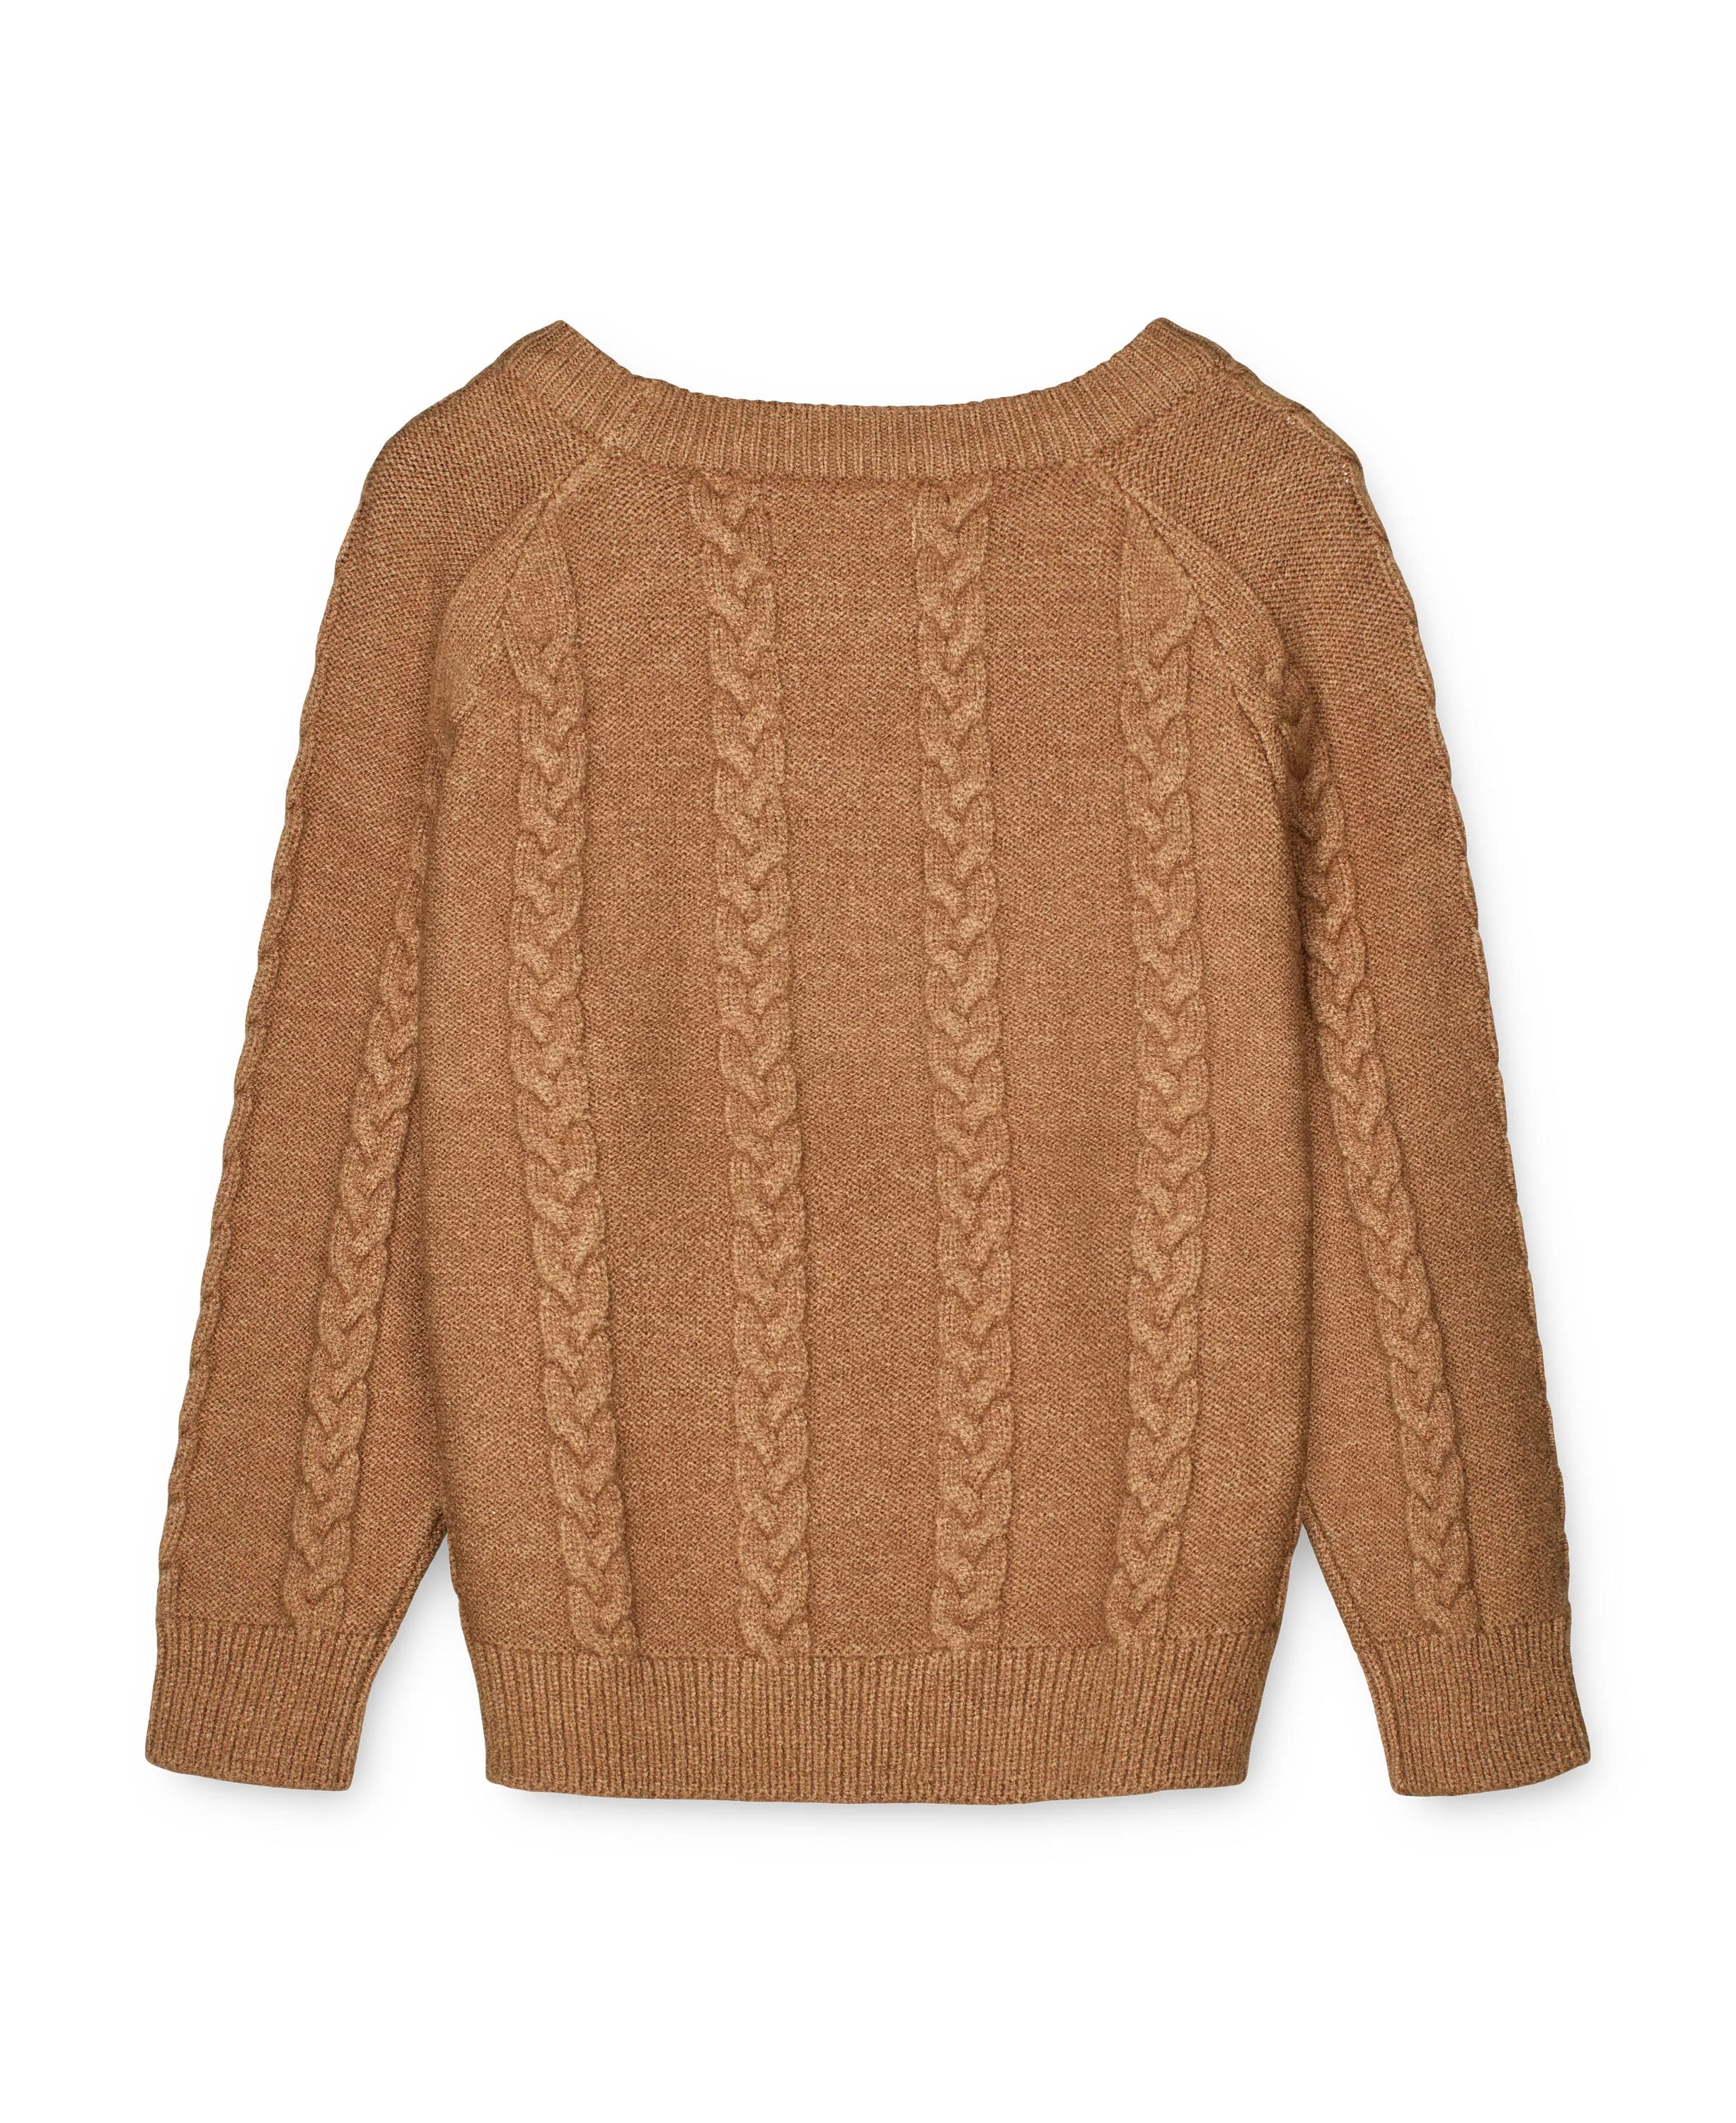 Benna Cable Knit Pullover - Tigers Eye | Fliink